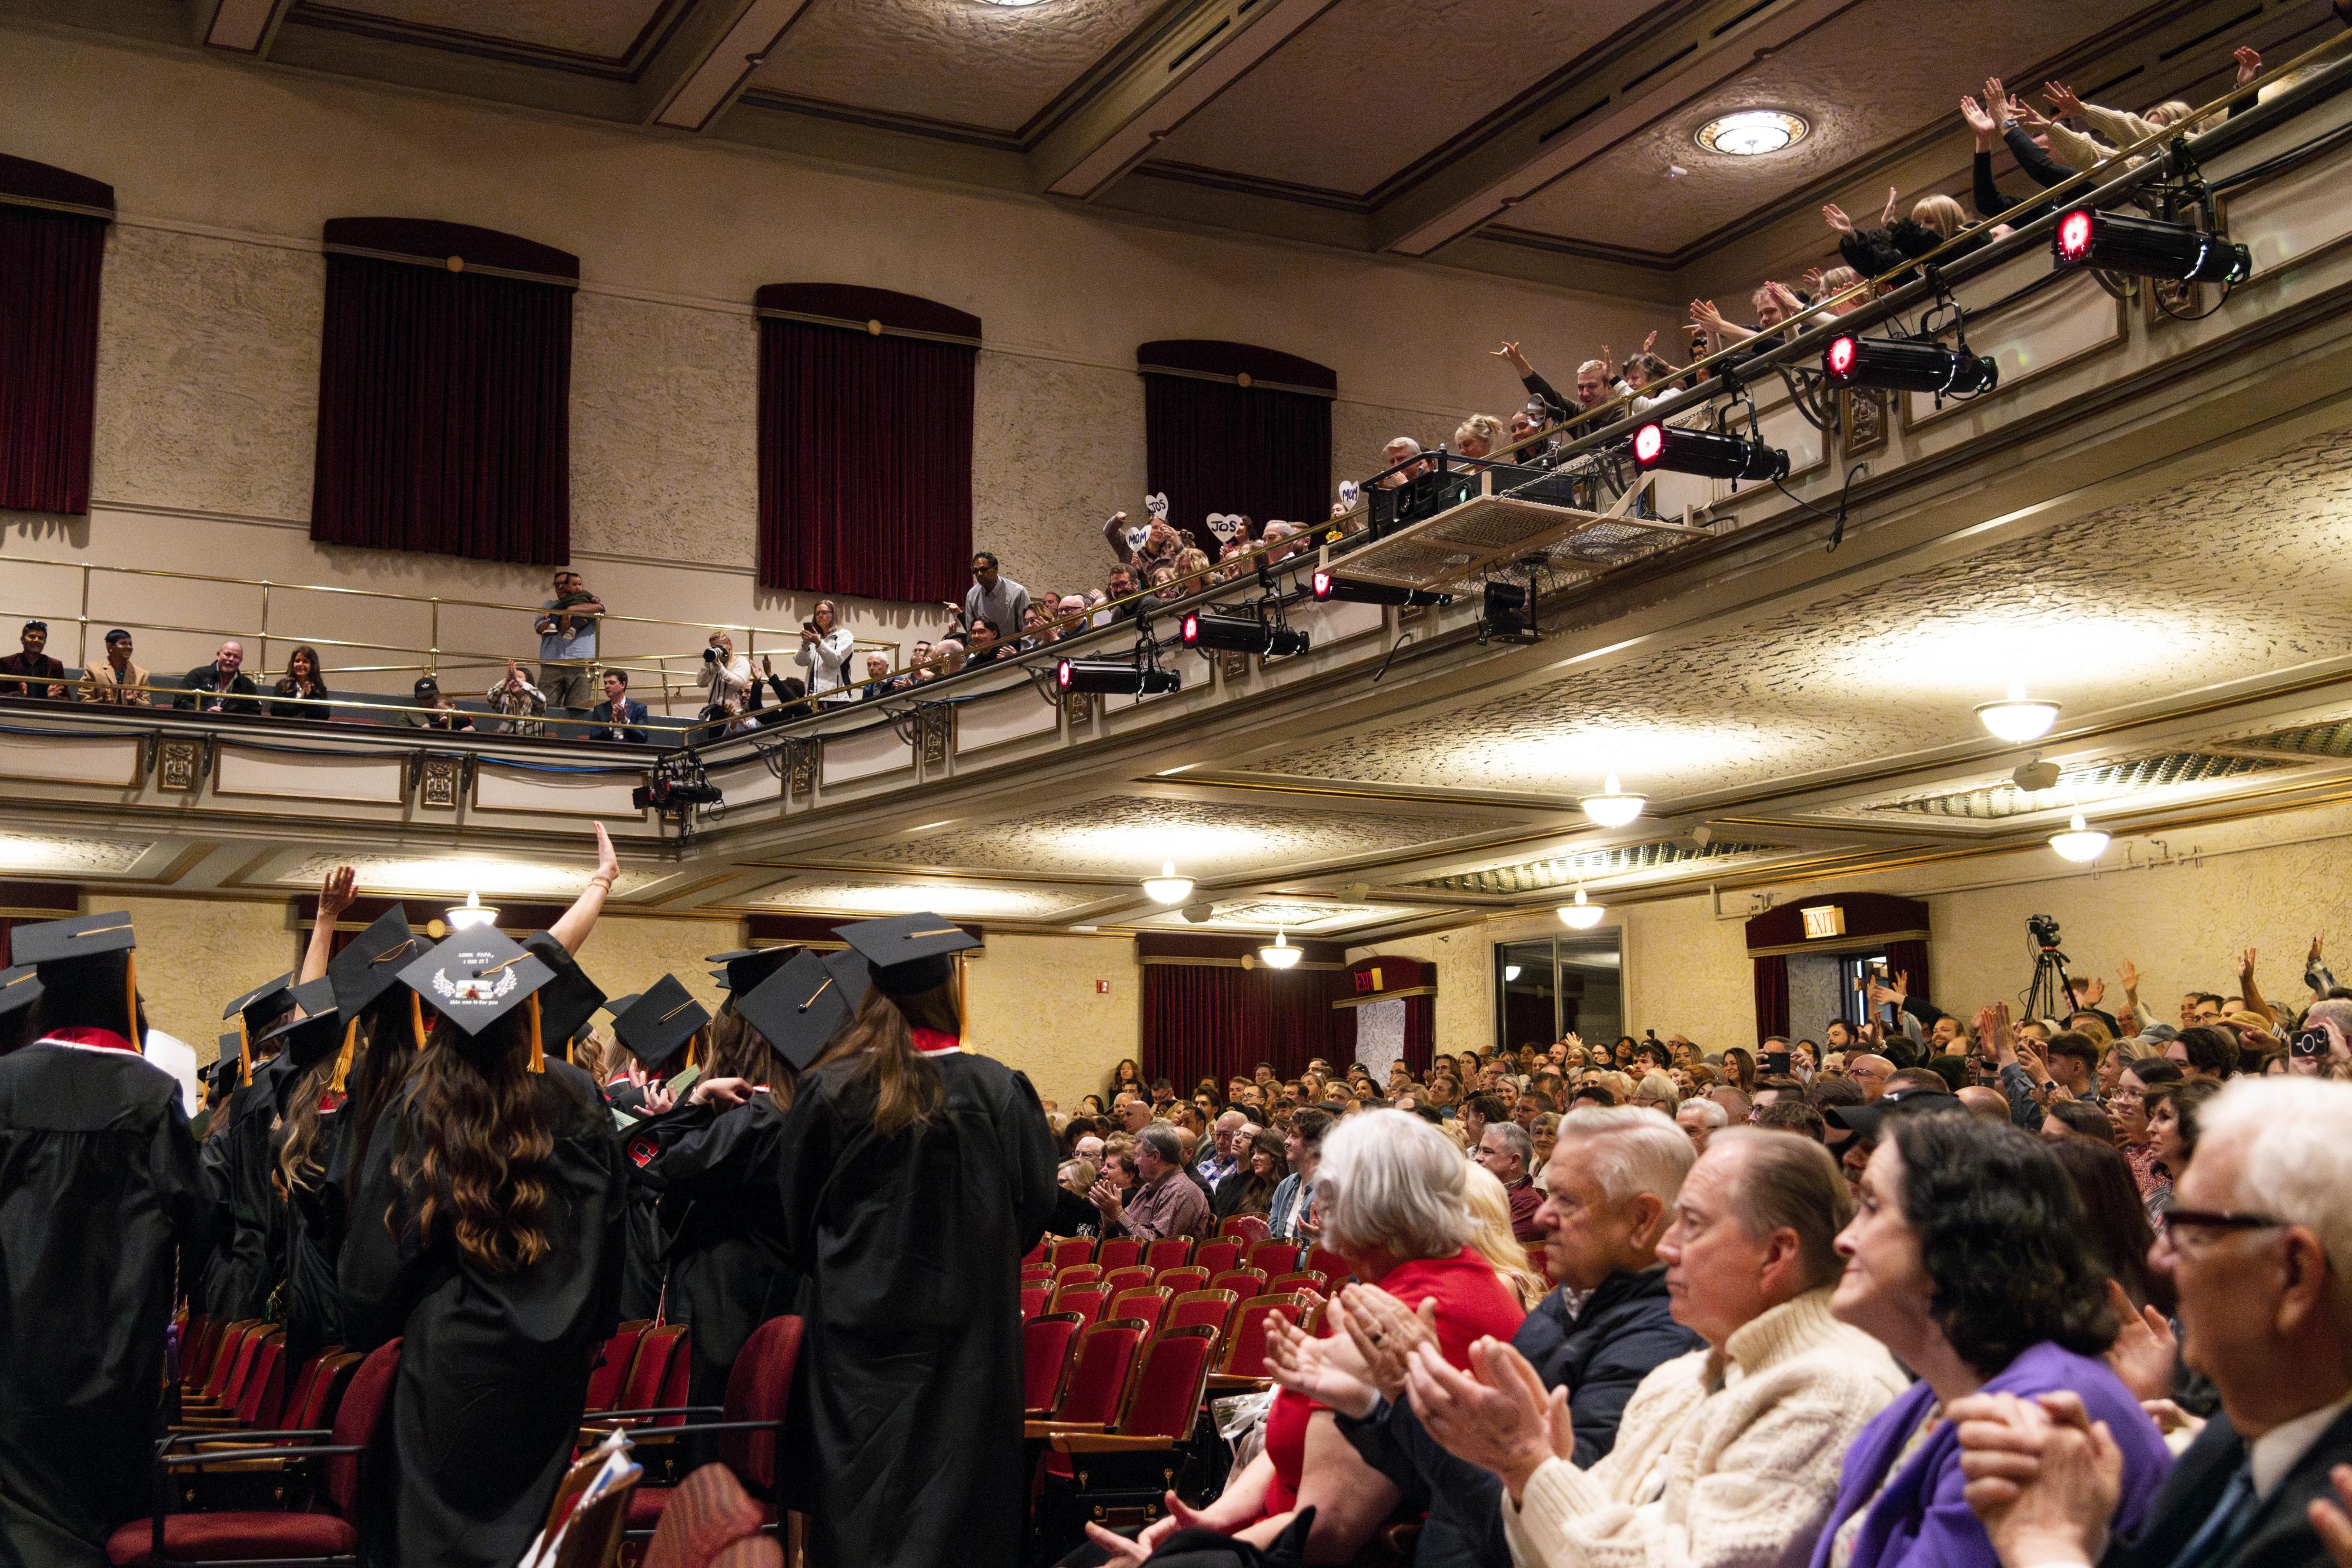 Graduates applaud towards supporters in the audience